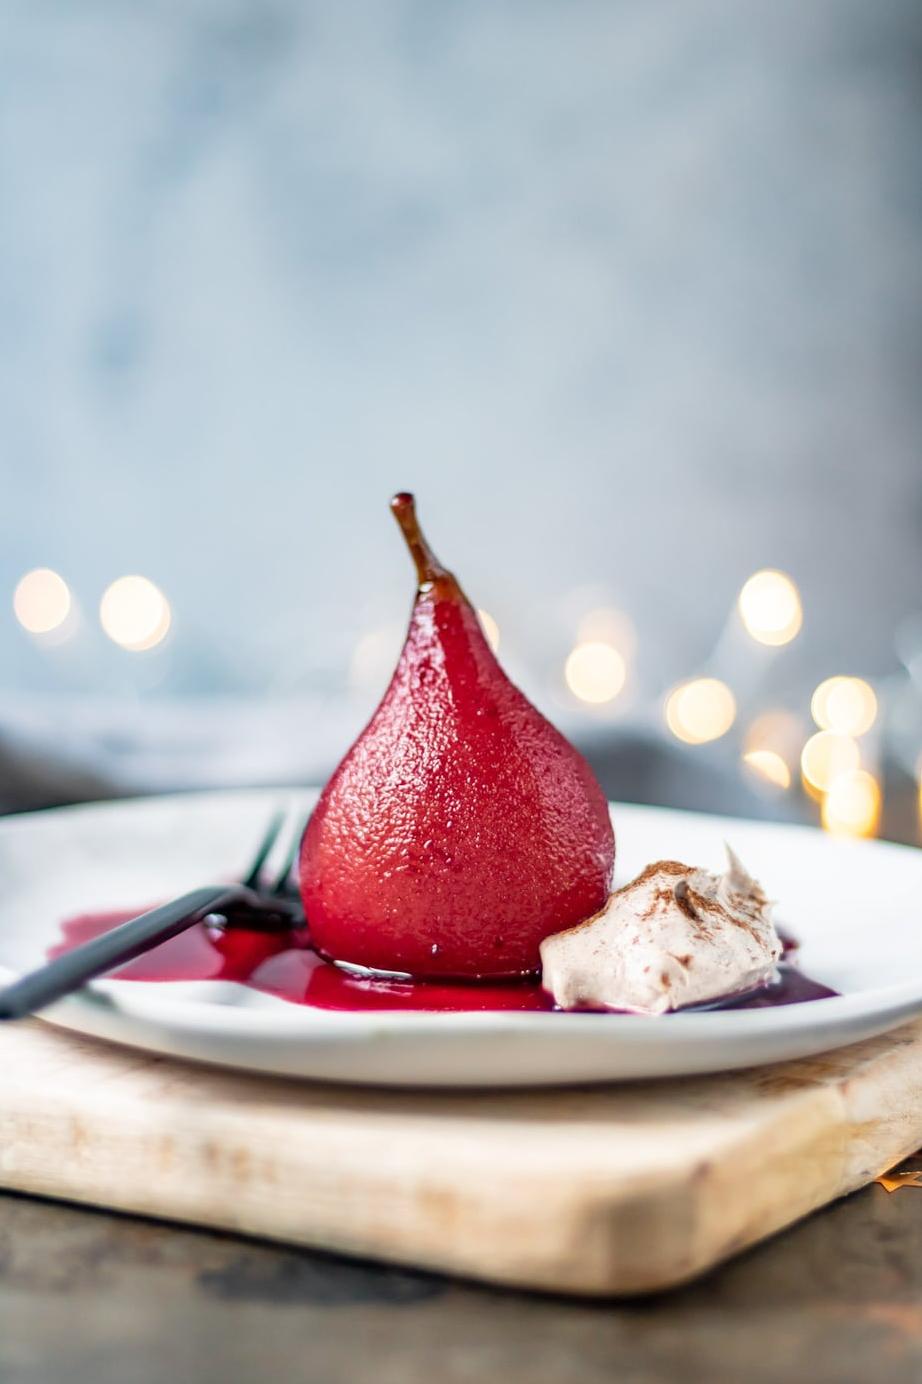  As decadent as it is effortless, Pears Poached in Red Wine is a treat you won't forget.